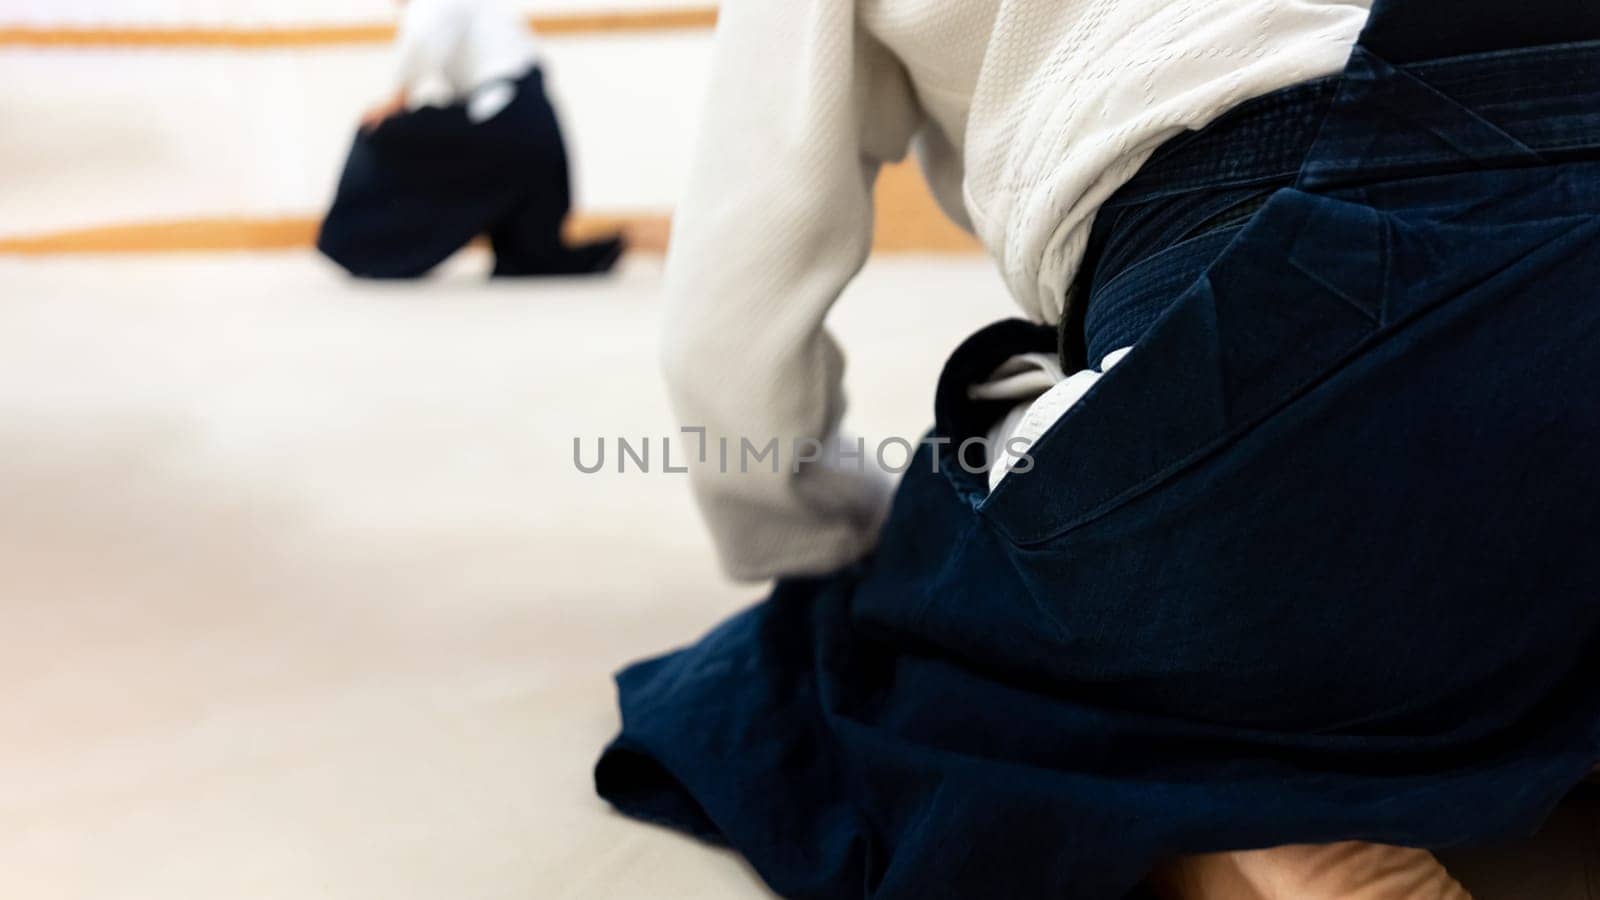 Practicing aikido martial art on a tatami. Greeting gesture.